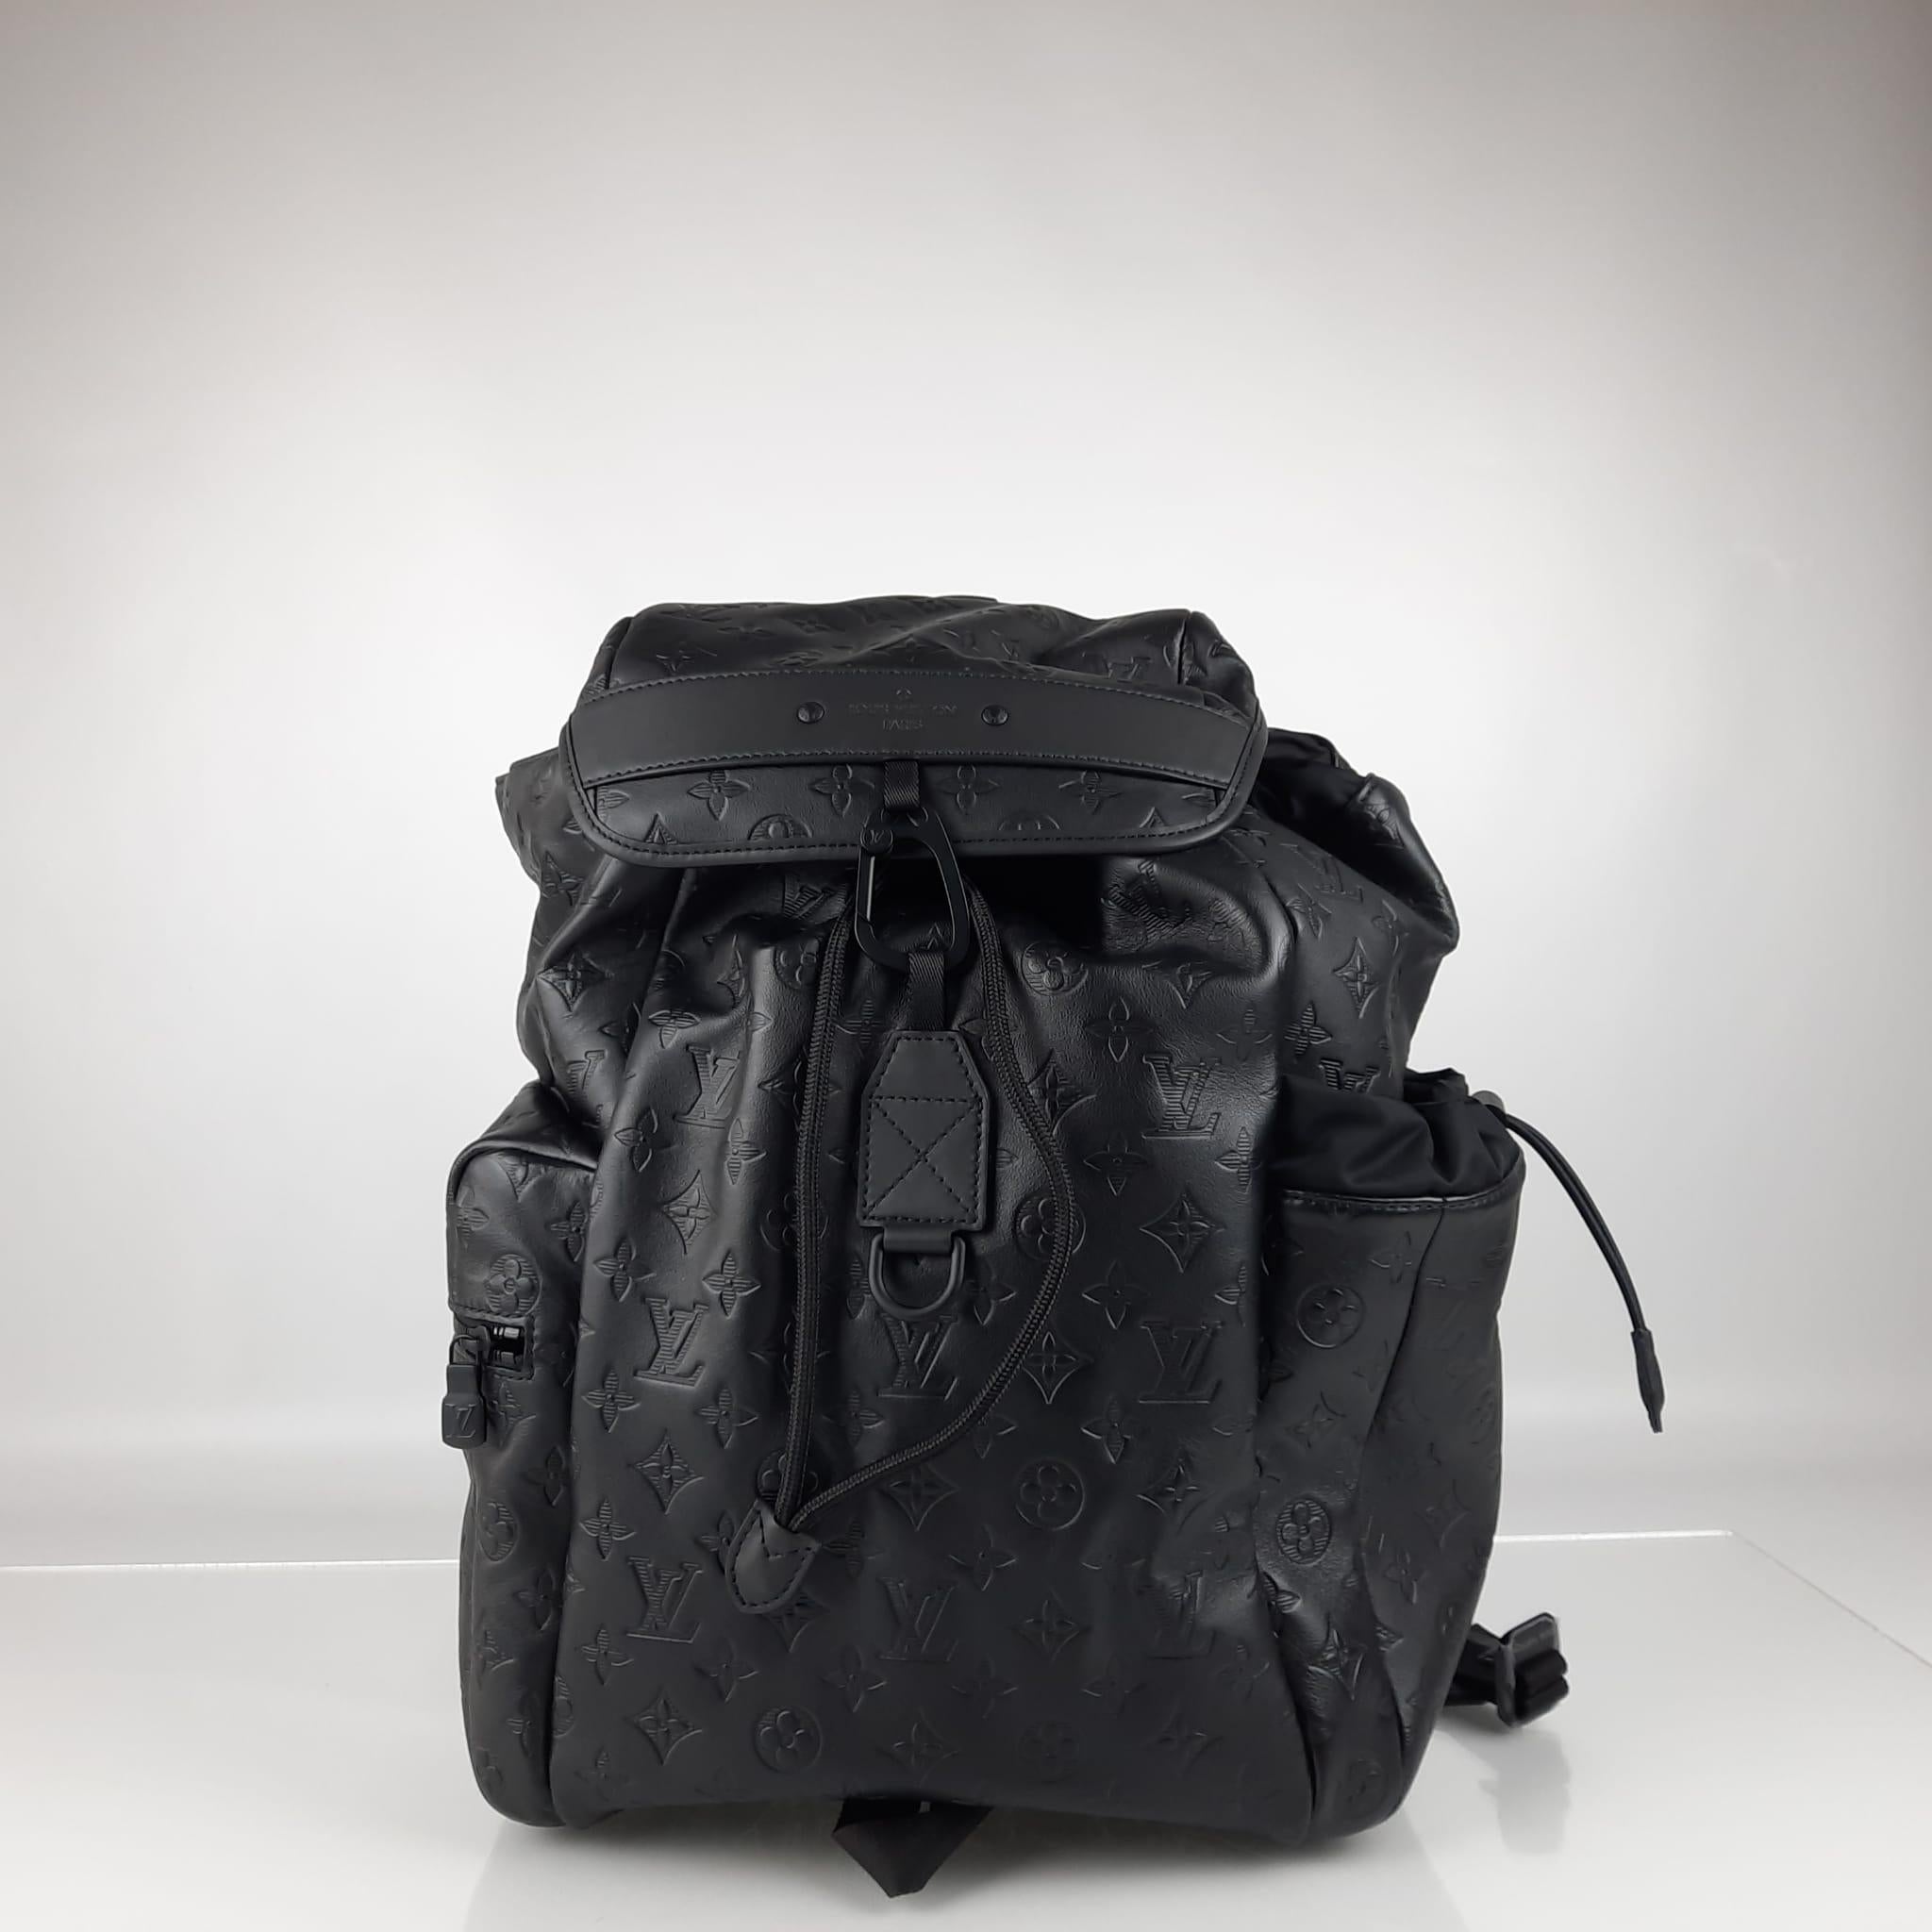 The Trekking Backpack is crafted from Monogram Shadow, a supple, subtly embossed calf leather. Created for the Men’s 2018 Fall Precollection, the Trekking backpack features outside pockets for quick access to belongings and a secure hook-and-eye